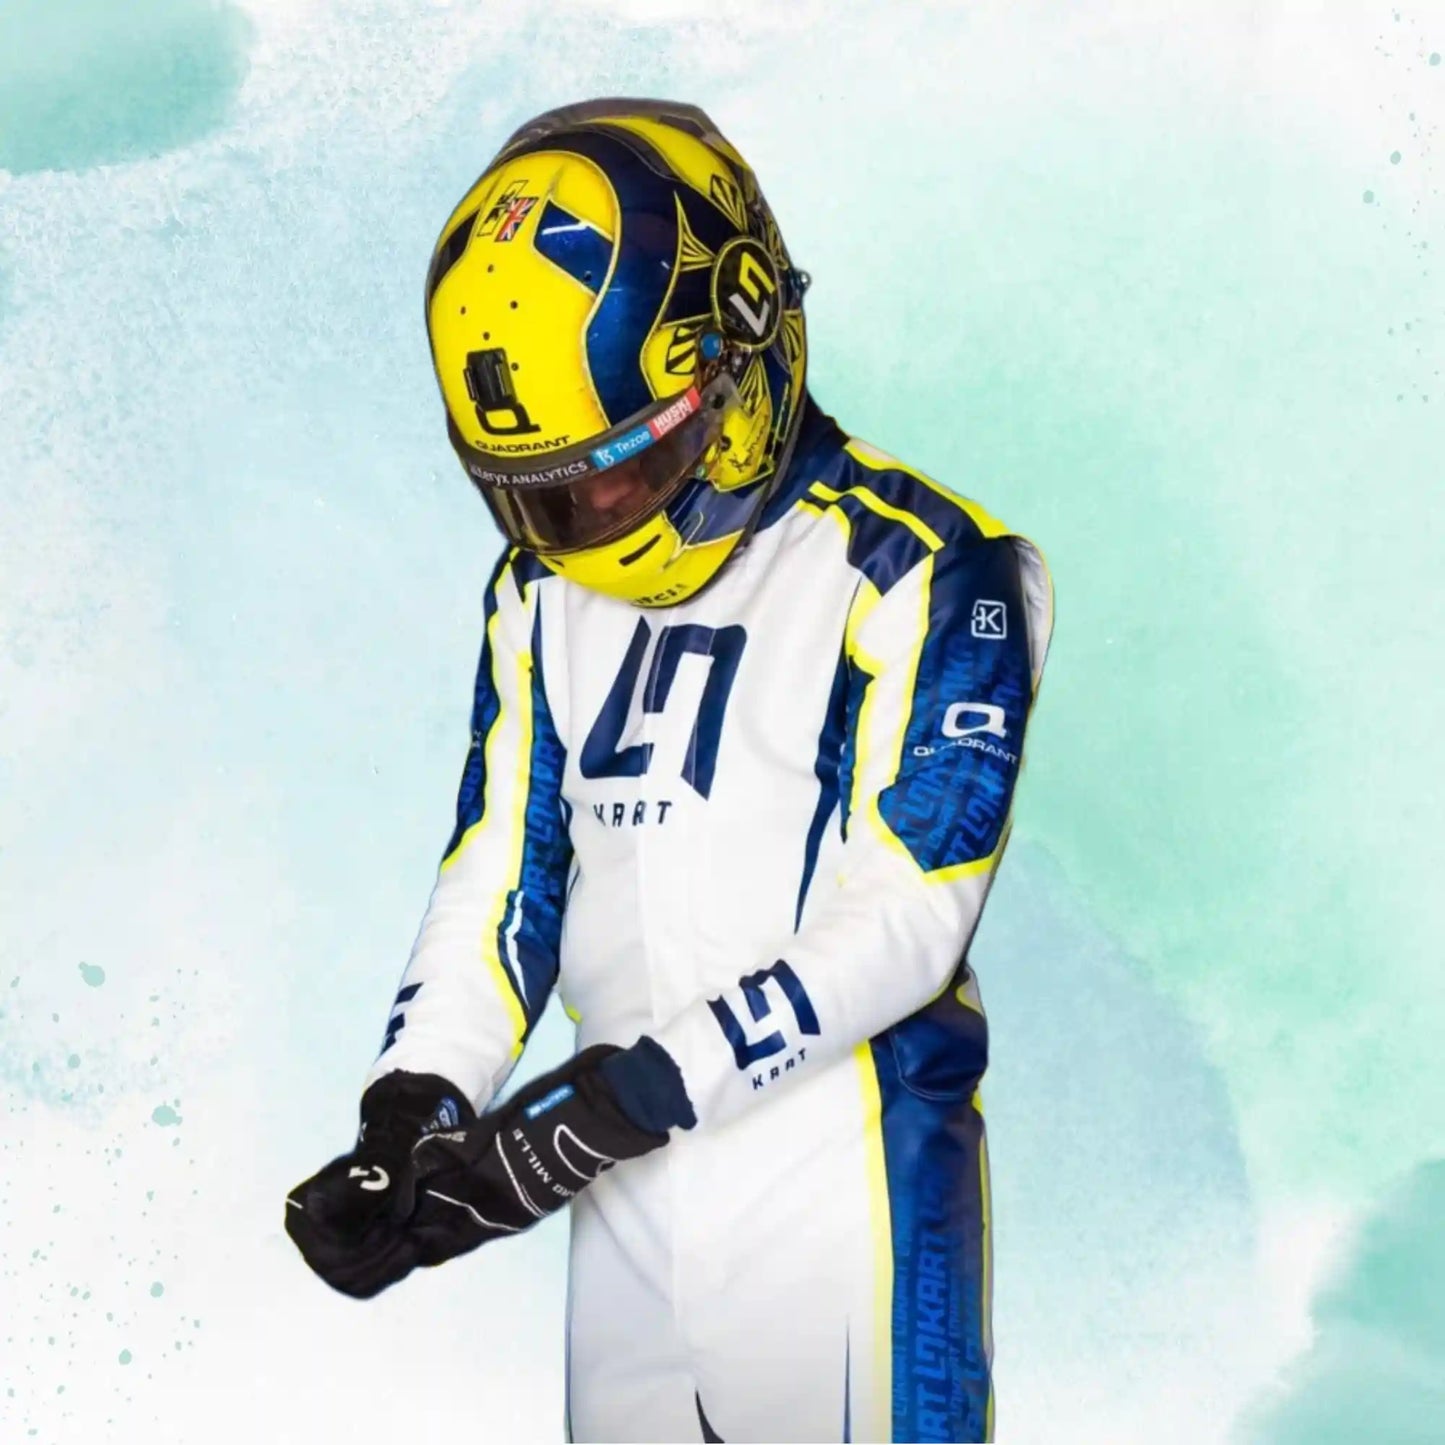 2022 New LN Kart Suit OMP Overall Karting Suit